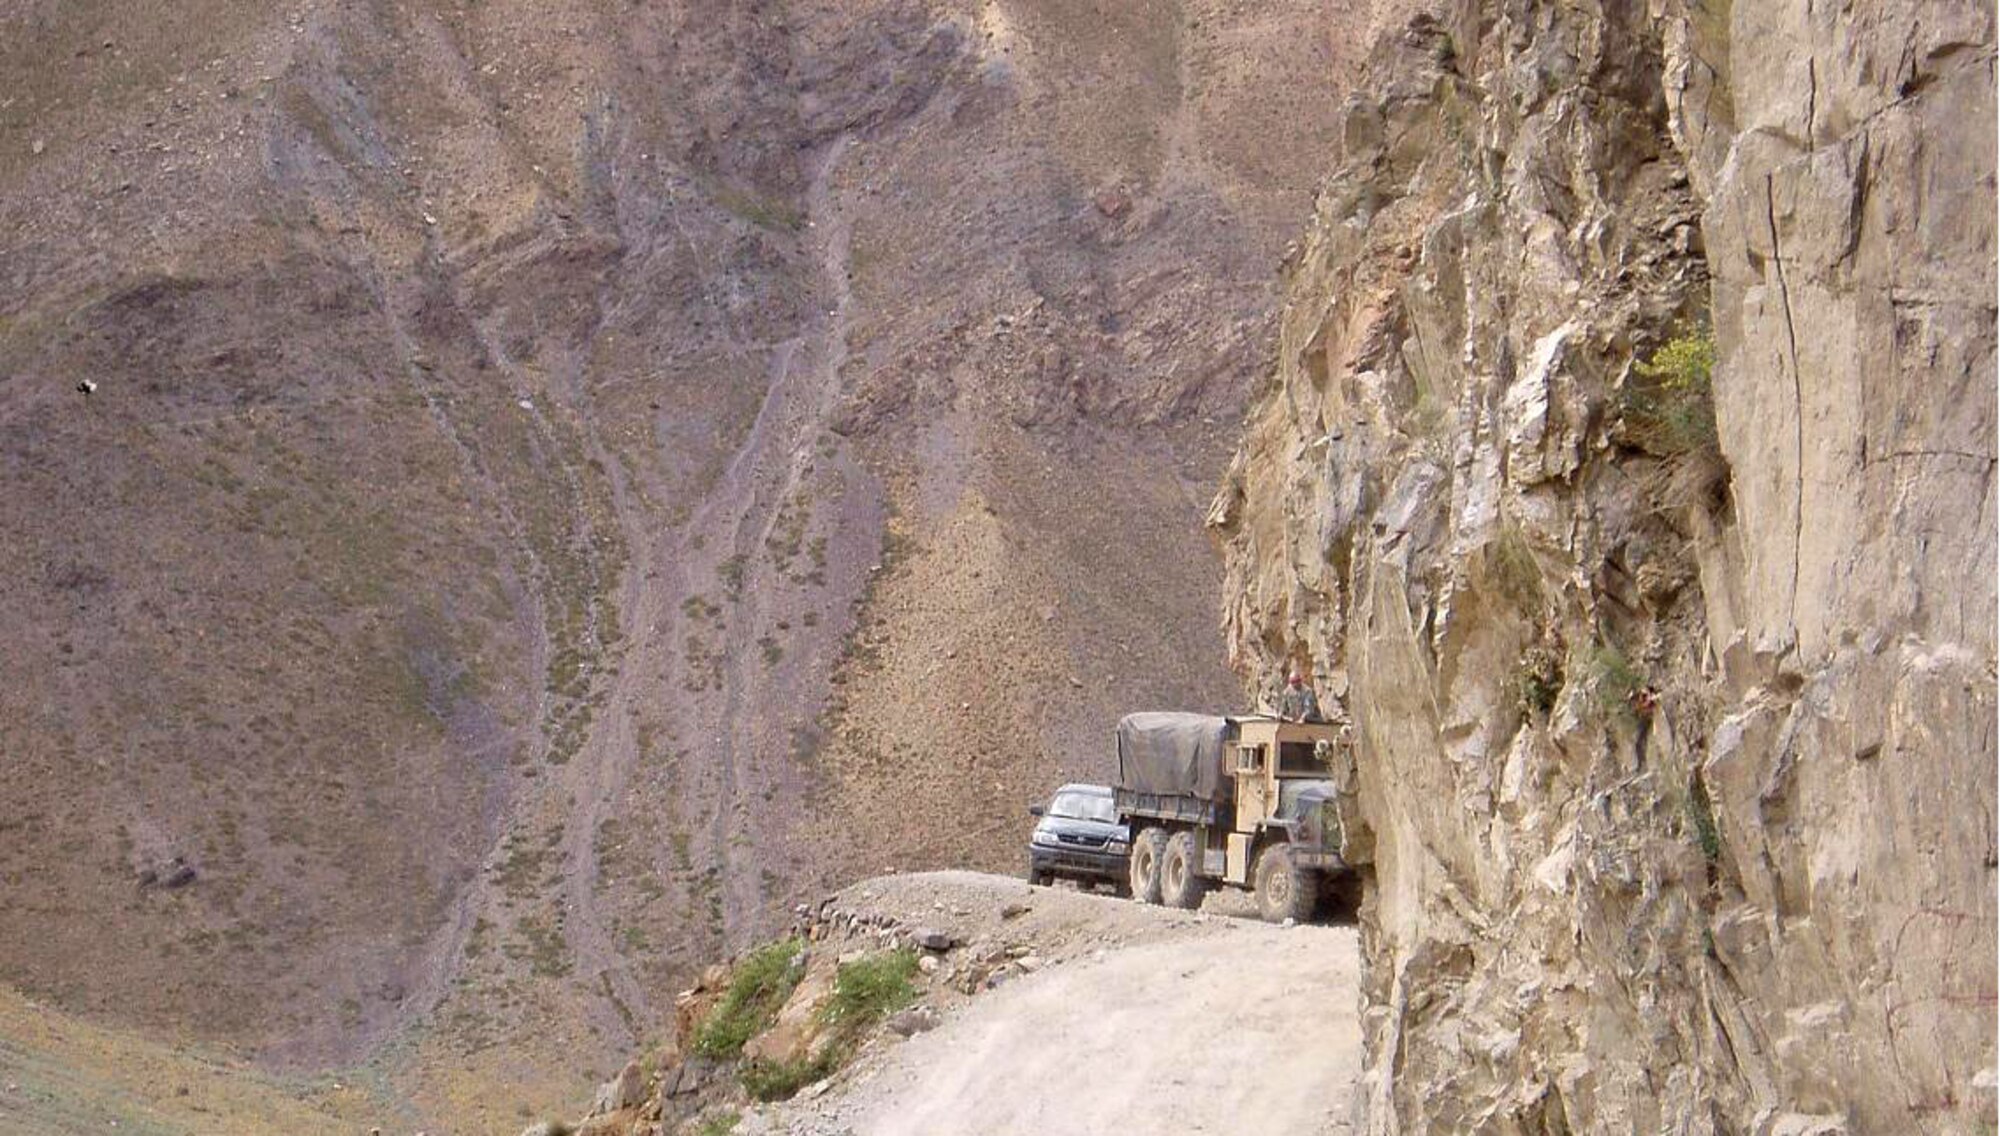 A truck loaded with humanitarian assistance supplies makes its way along a narrow road in the Panjshir Province, Afghanistan, on Monday, June 12. With help of a ground guide and spotter in the truck's turret, the multi-service supply convoy delivered approximately four tons of food to the village of Dara. (Courtesy photo/Tech. Sgt. Charles Campbell)